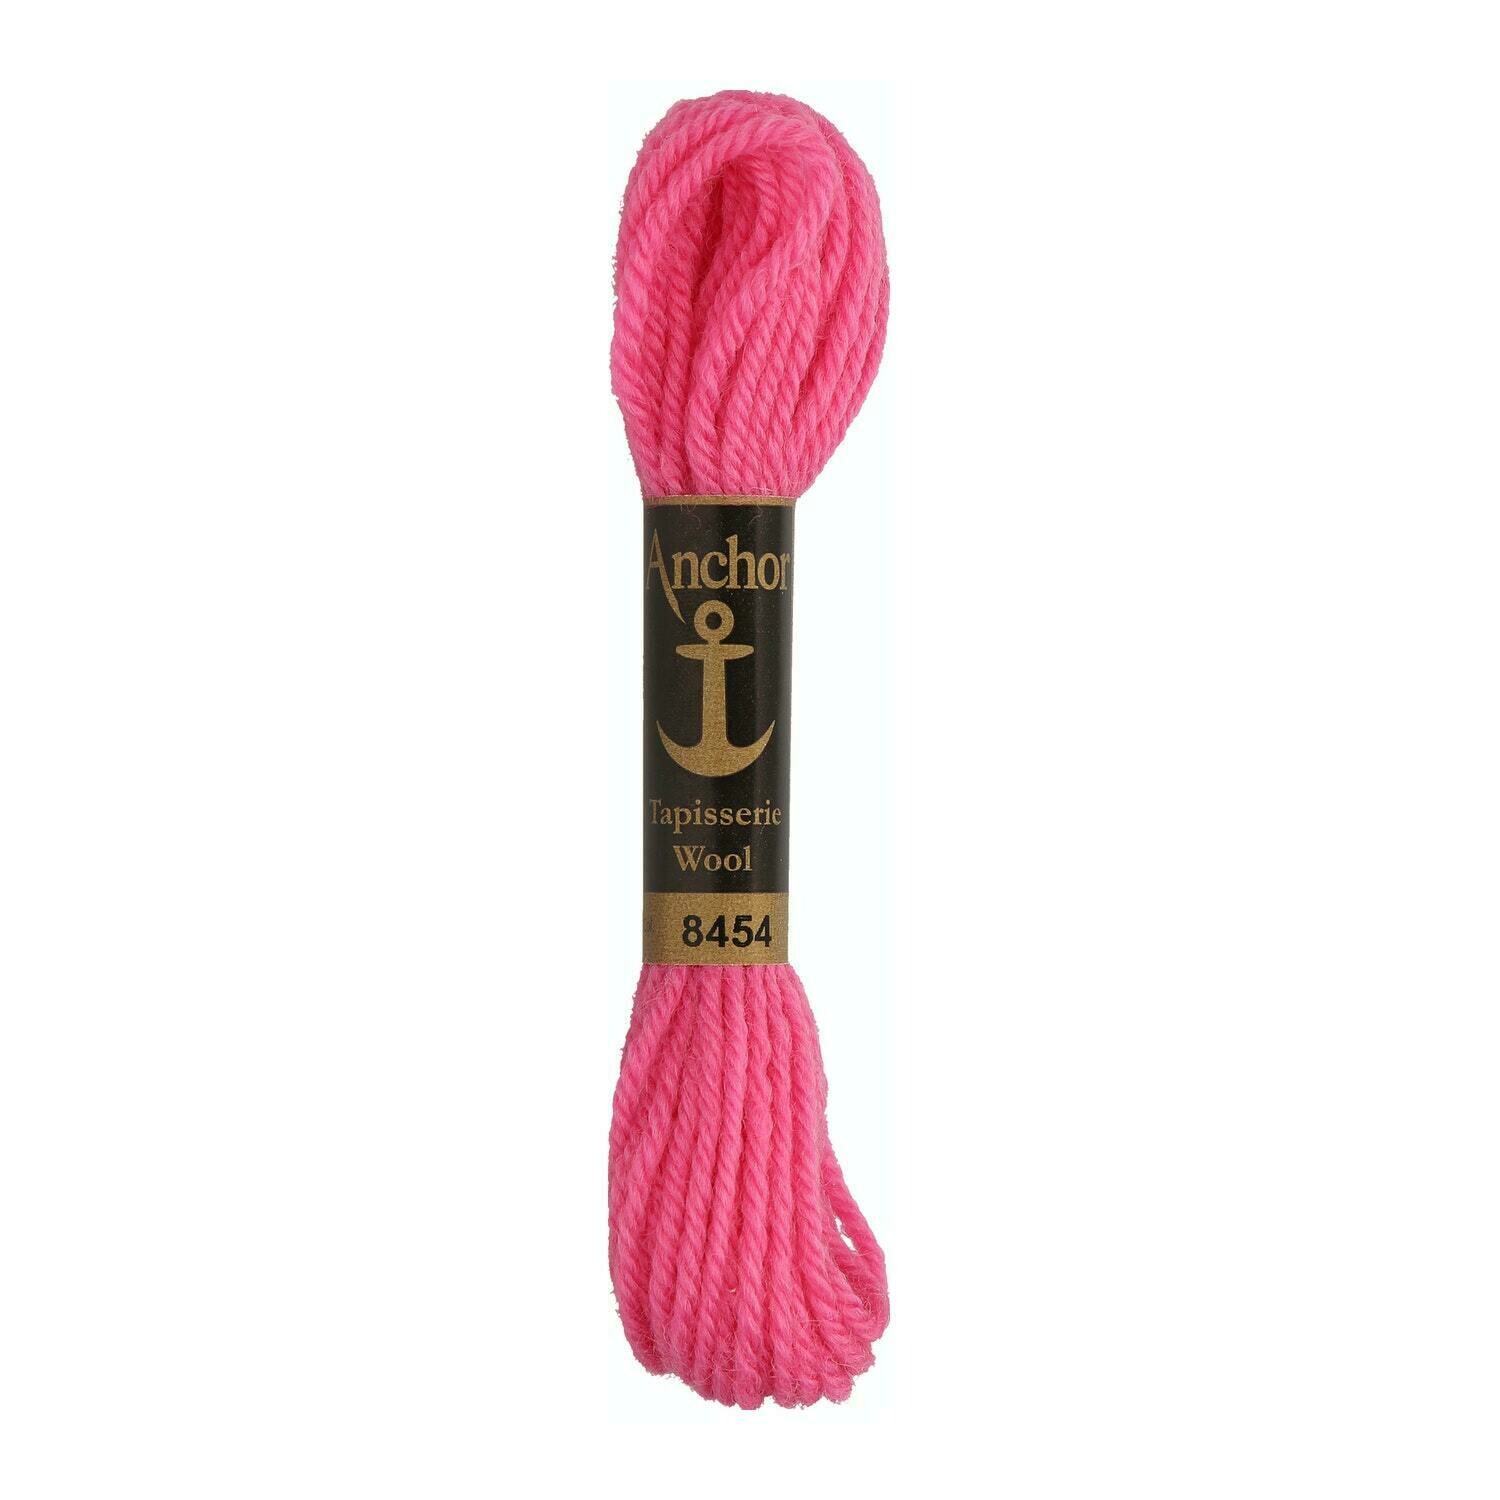 Anchor Tapisserie Wool #08454